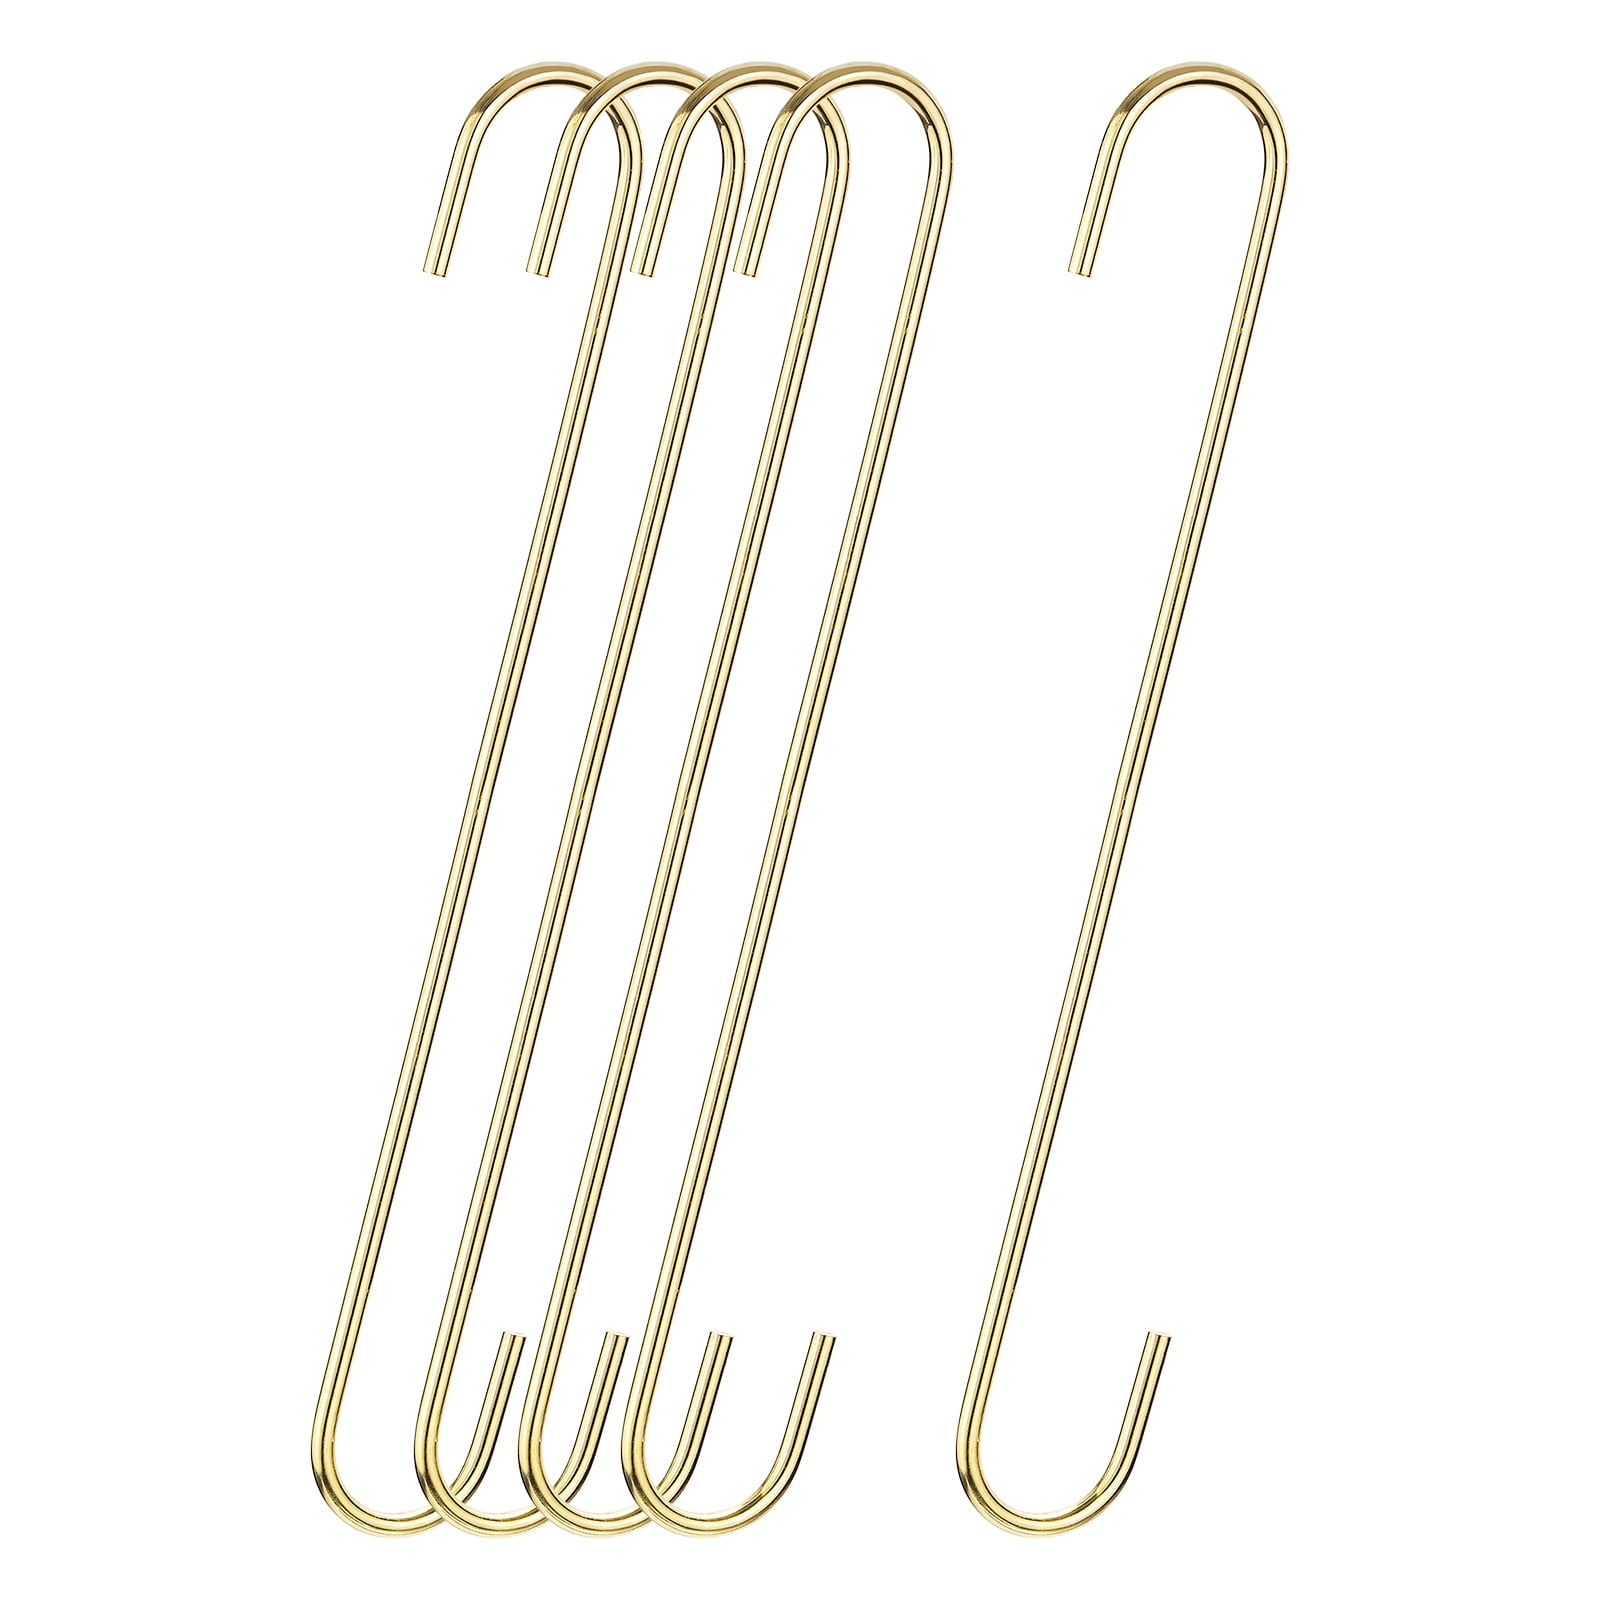 Mini S Hooks Connectors S Shaped Wire Hook Hangers 100pcs Hanging Hooks for  DIY Crafts, Hanging Jewelry, Key Chain, Tags, Fishing Lure, Net Equipment  (0.59 Inch) 